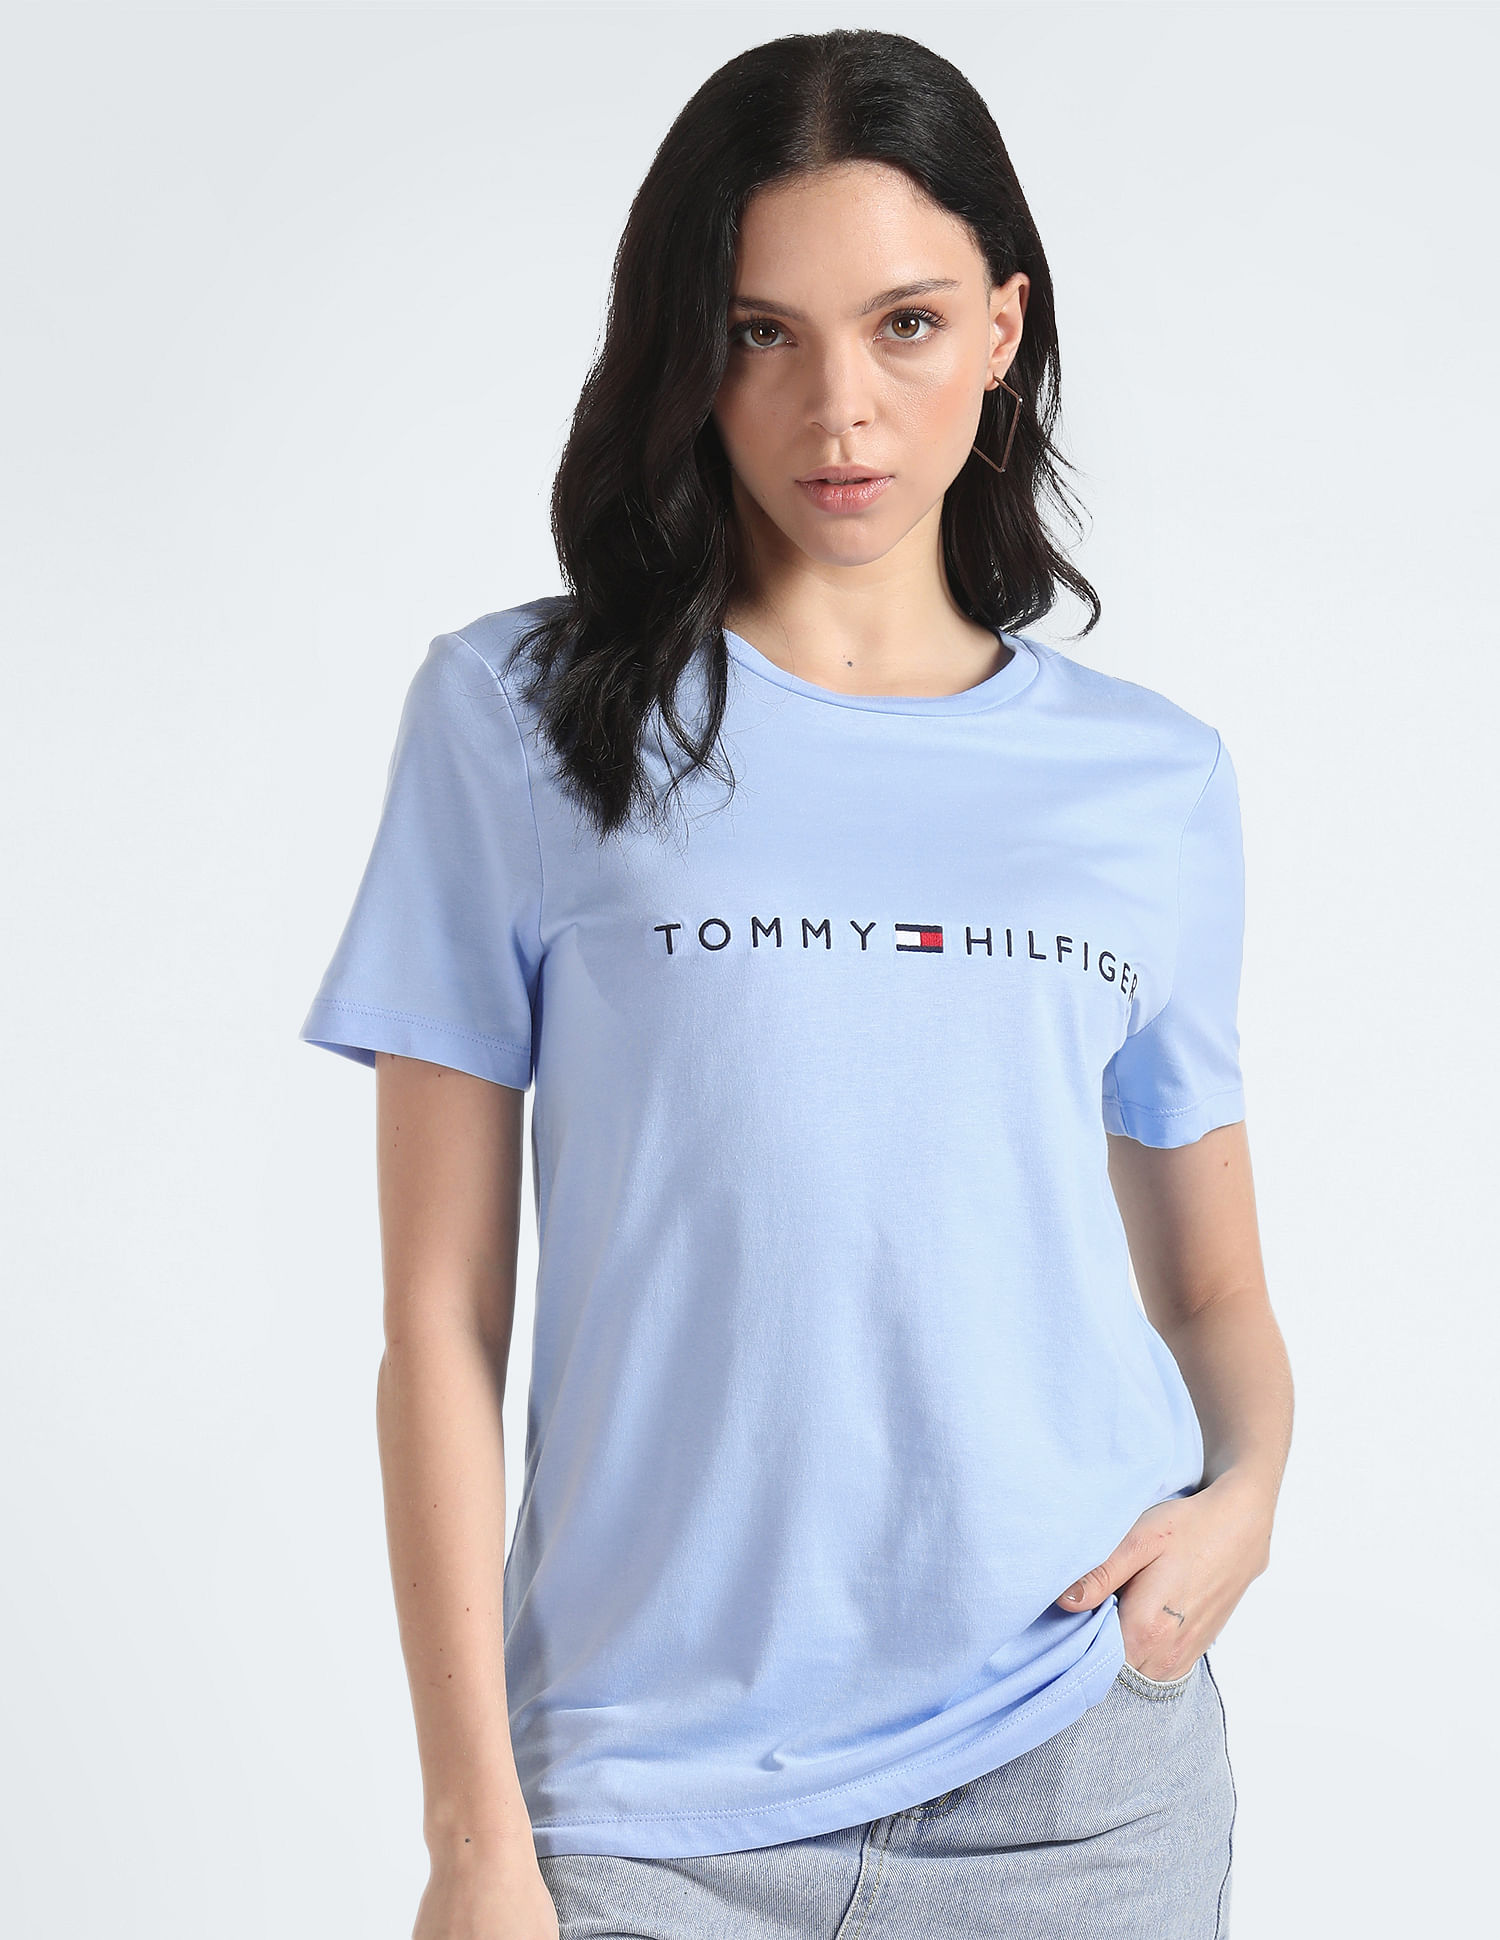 Buy Tommy Hilfiger Crew Neck Corporate T-Shirt